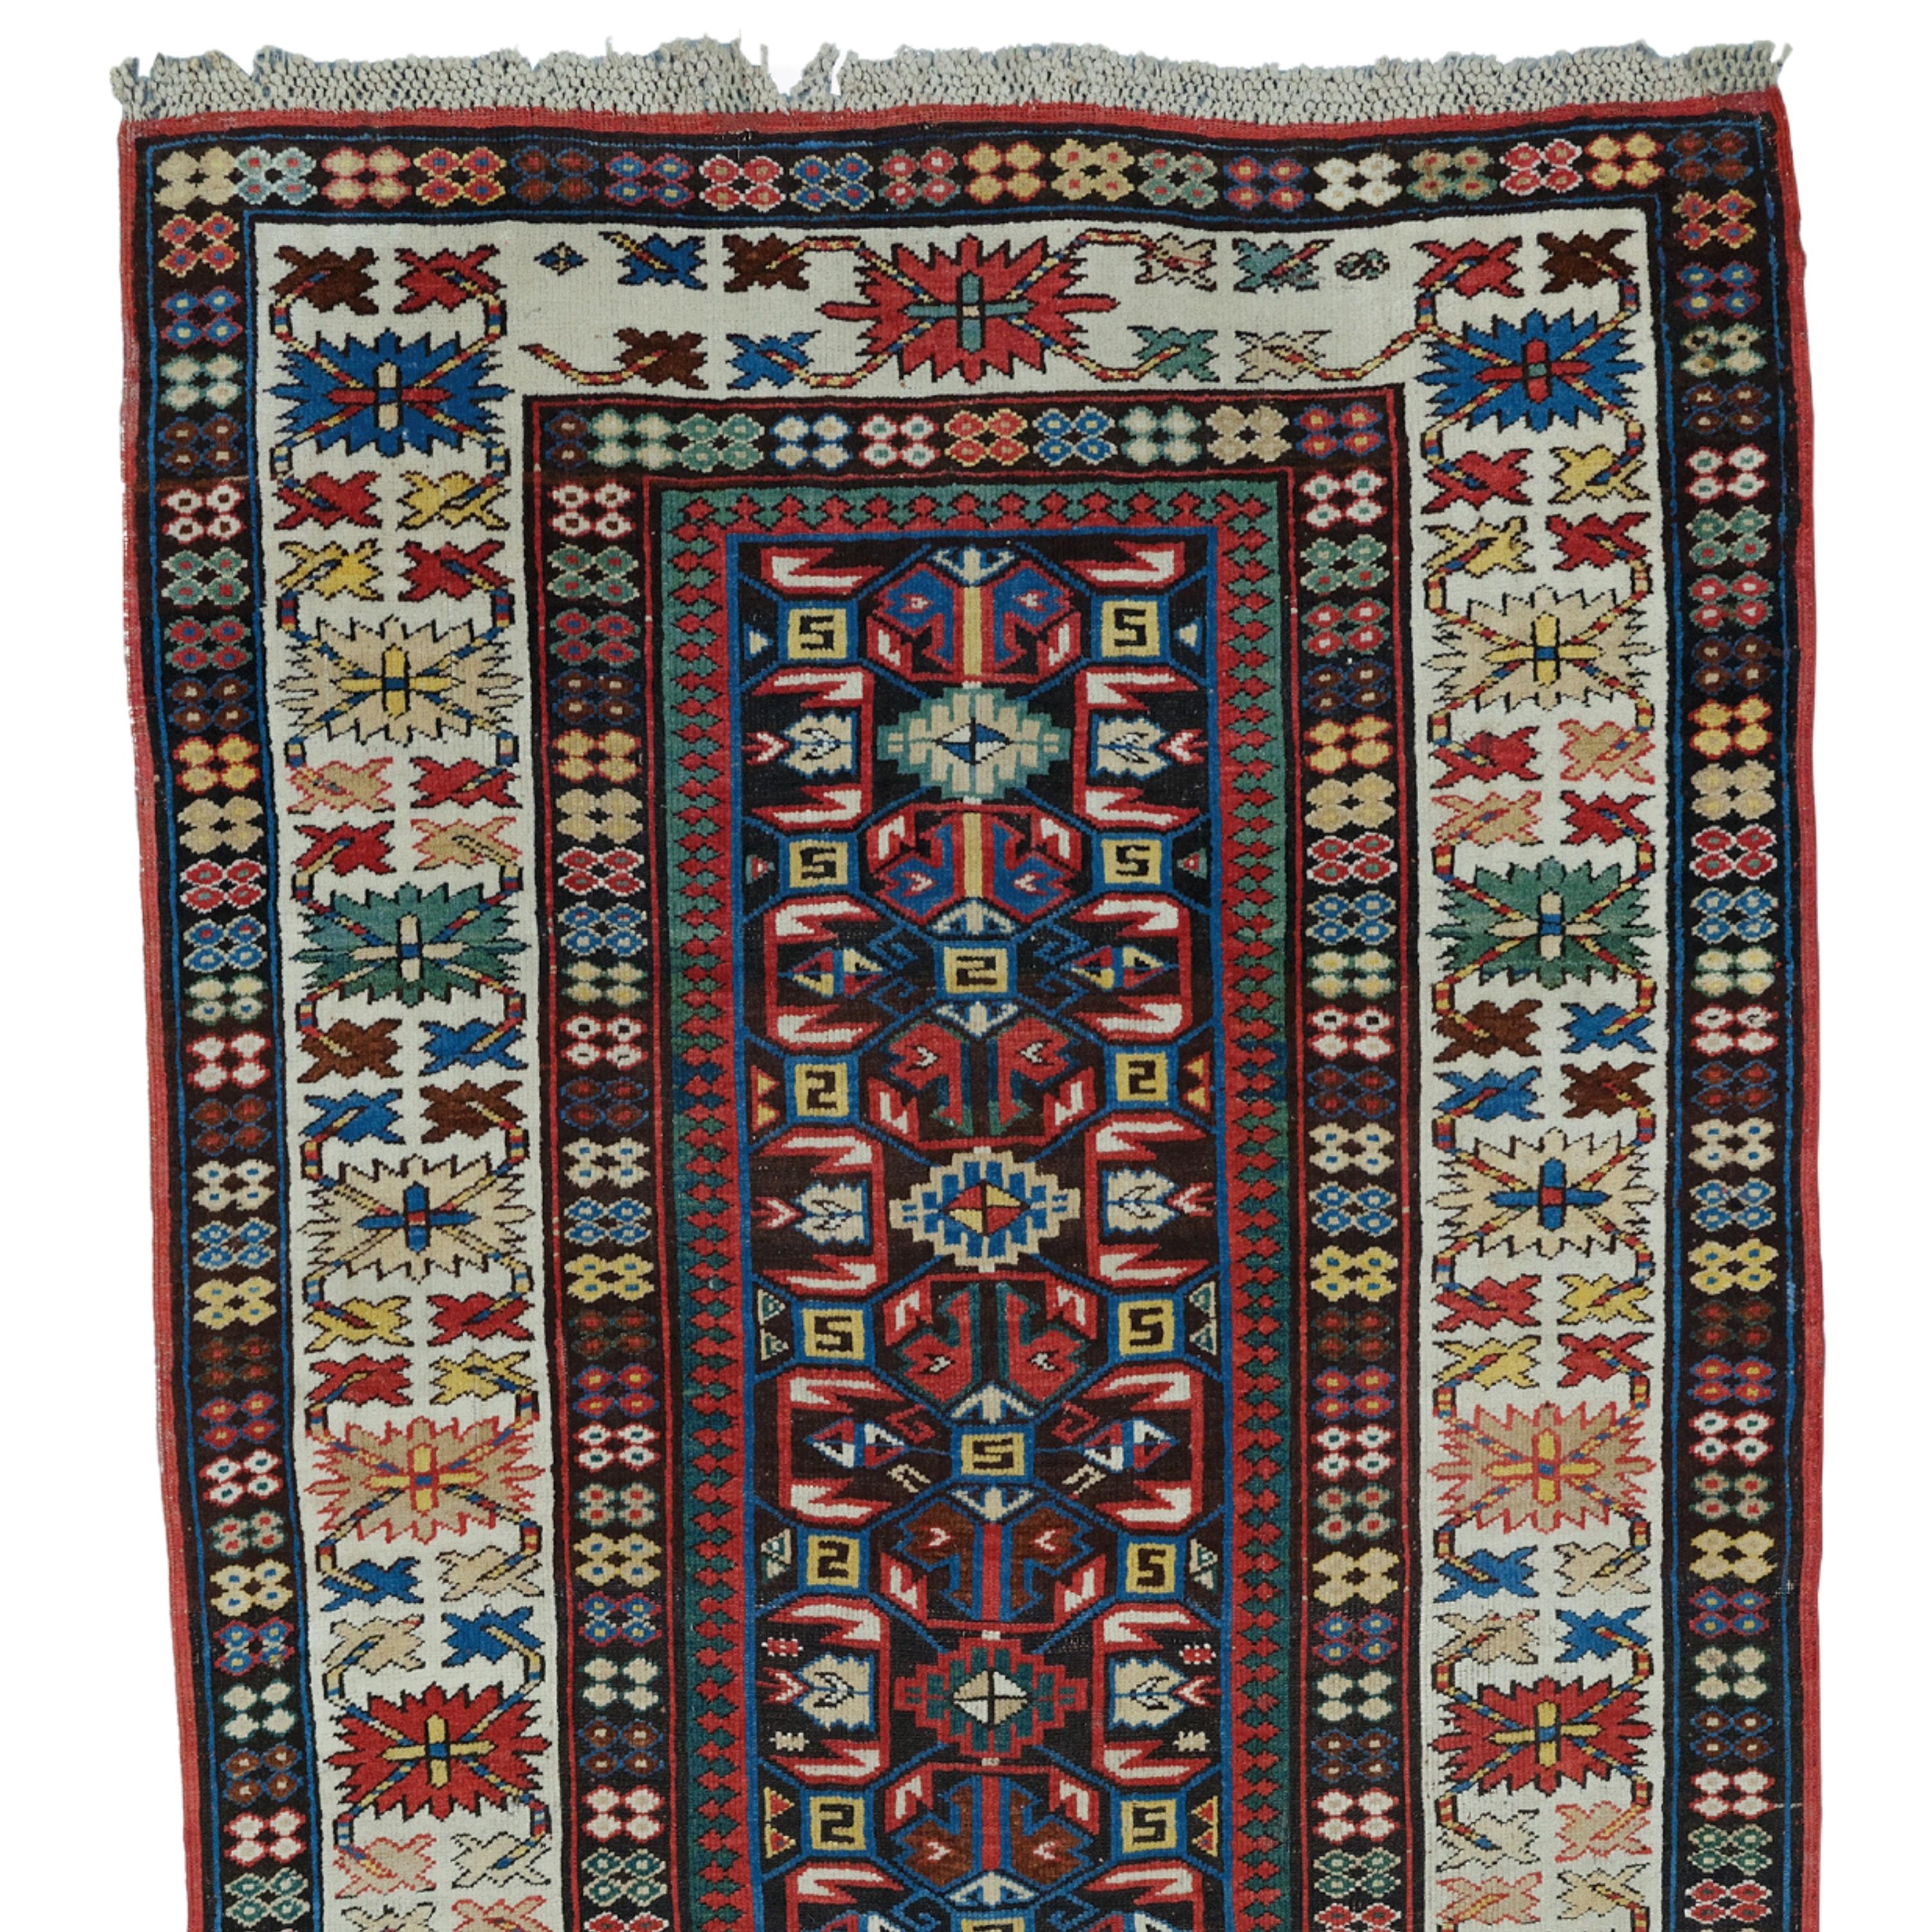 Antique Shirvan Runner - 19th Century Antique Caucasus Shirvan Runner

This elegant antique Caucasian Shirvan runner brings the elegance and craftsmanship of the 19th century to the present day. With its rich color palette and intricate patterns,